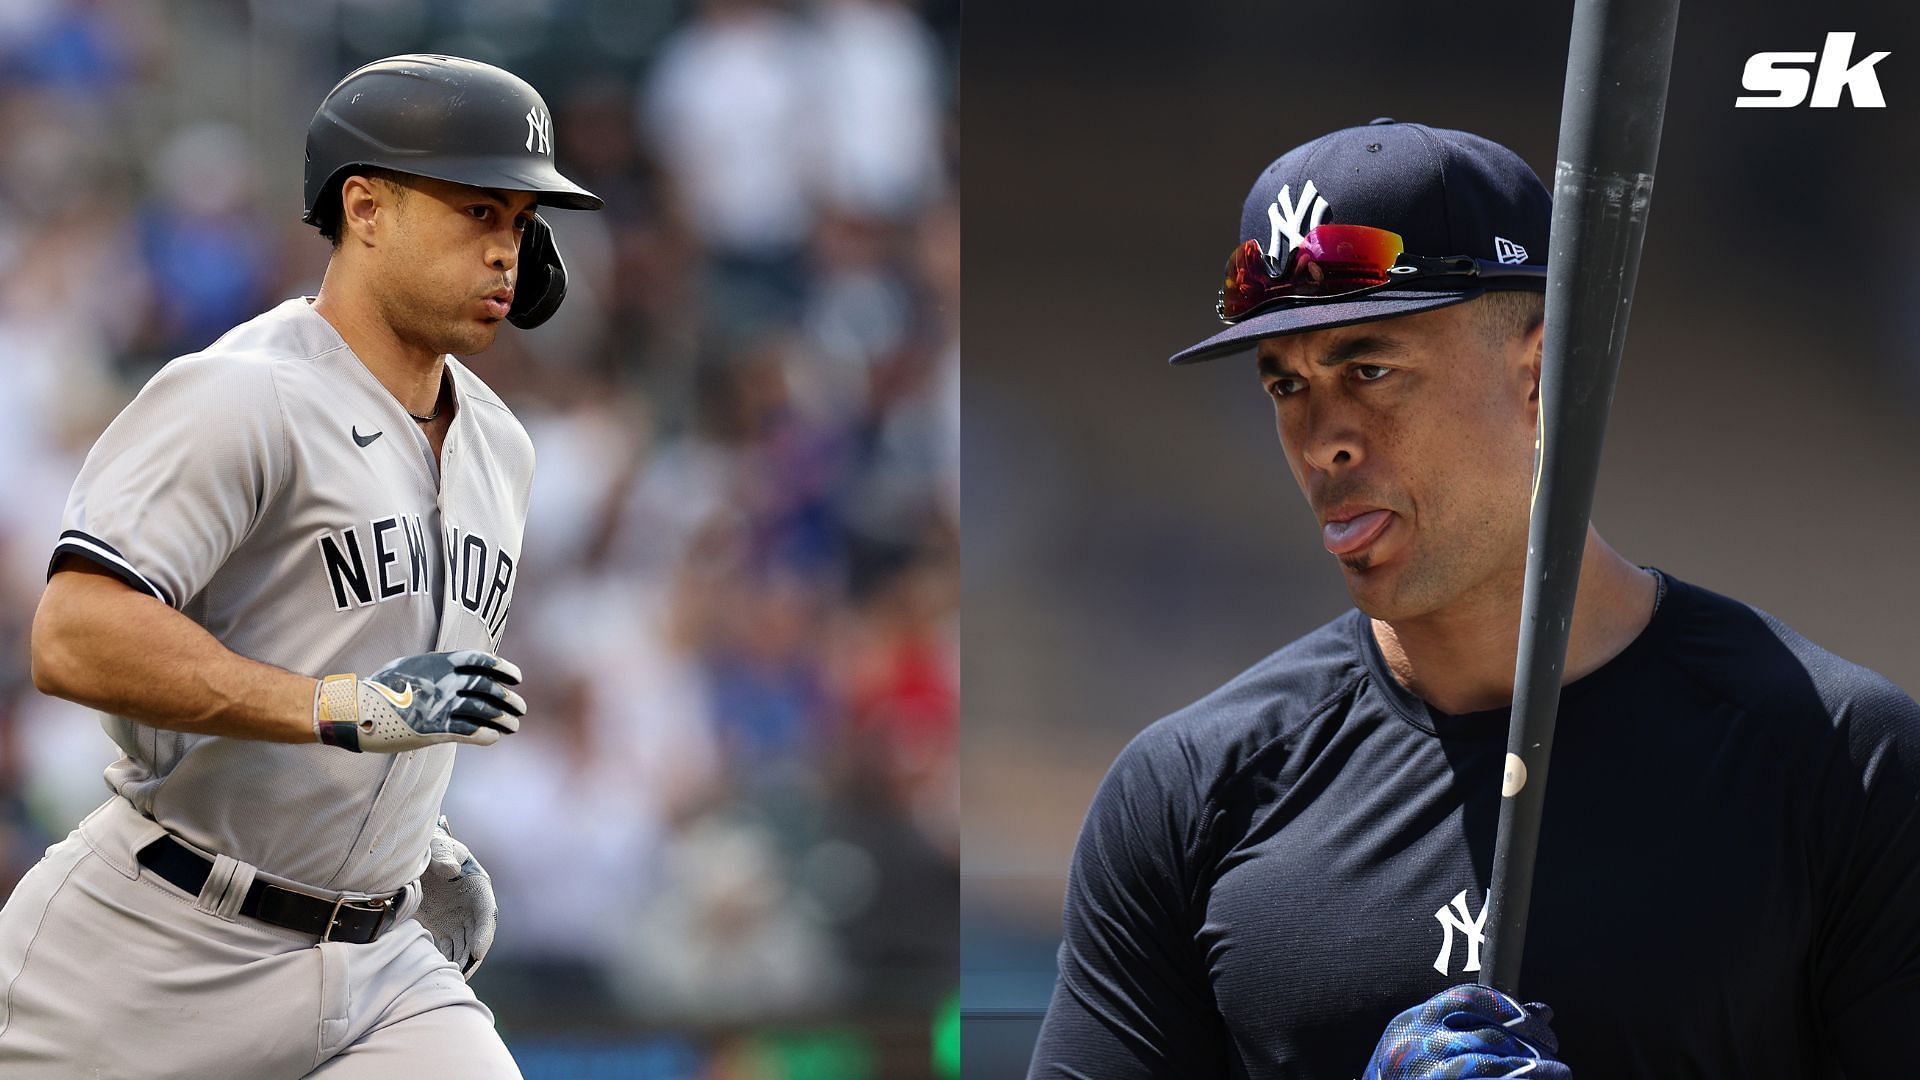 Yankees' Giancarlo Stanton must rise to occasion in 2nd half